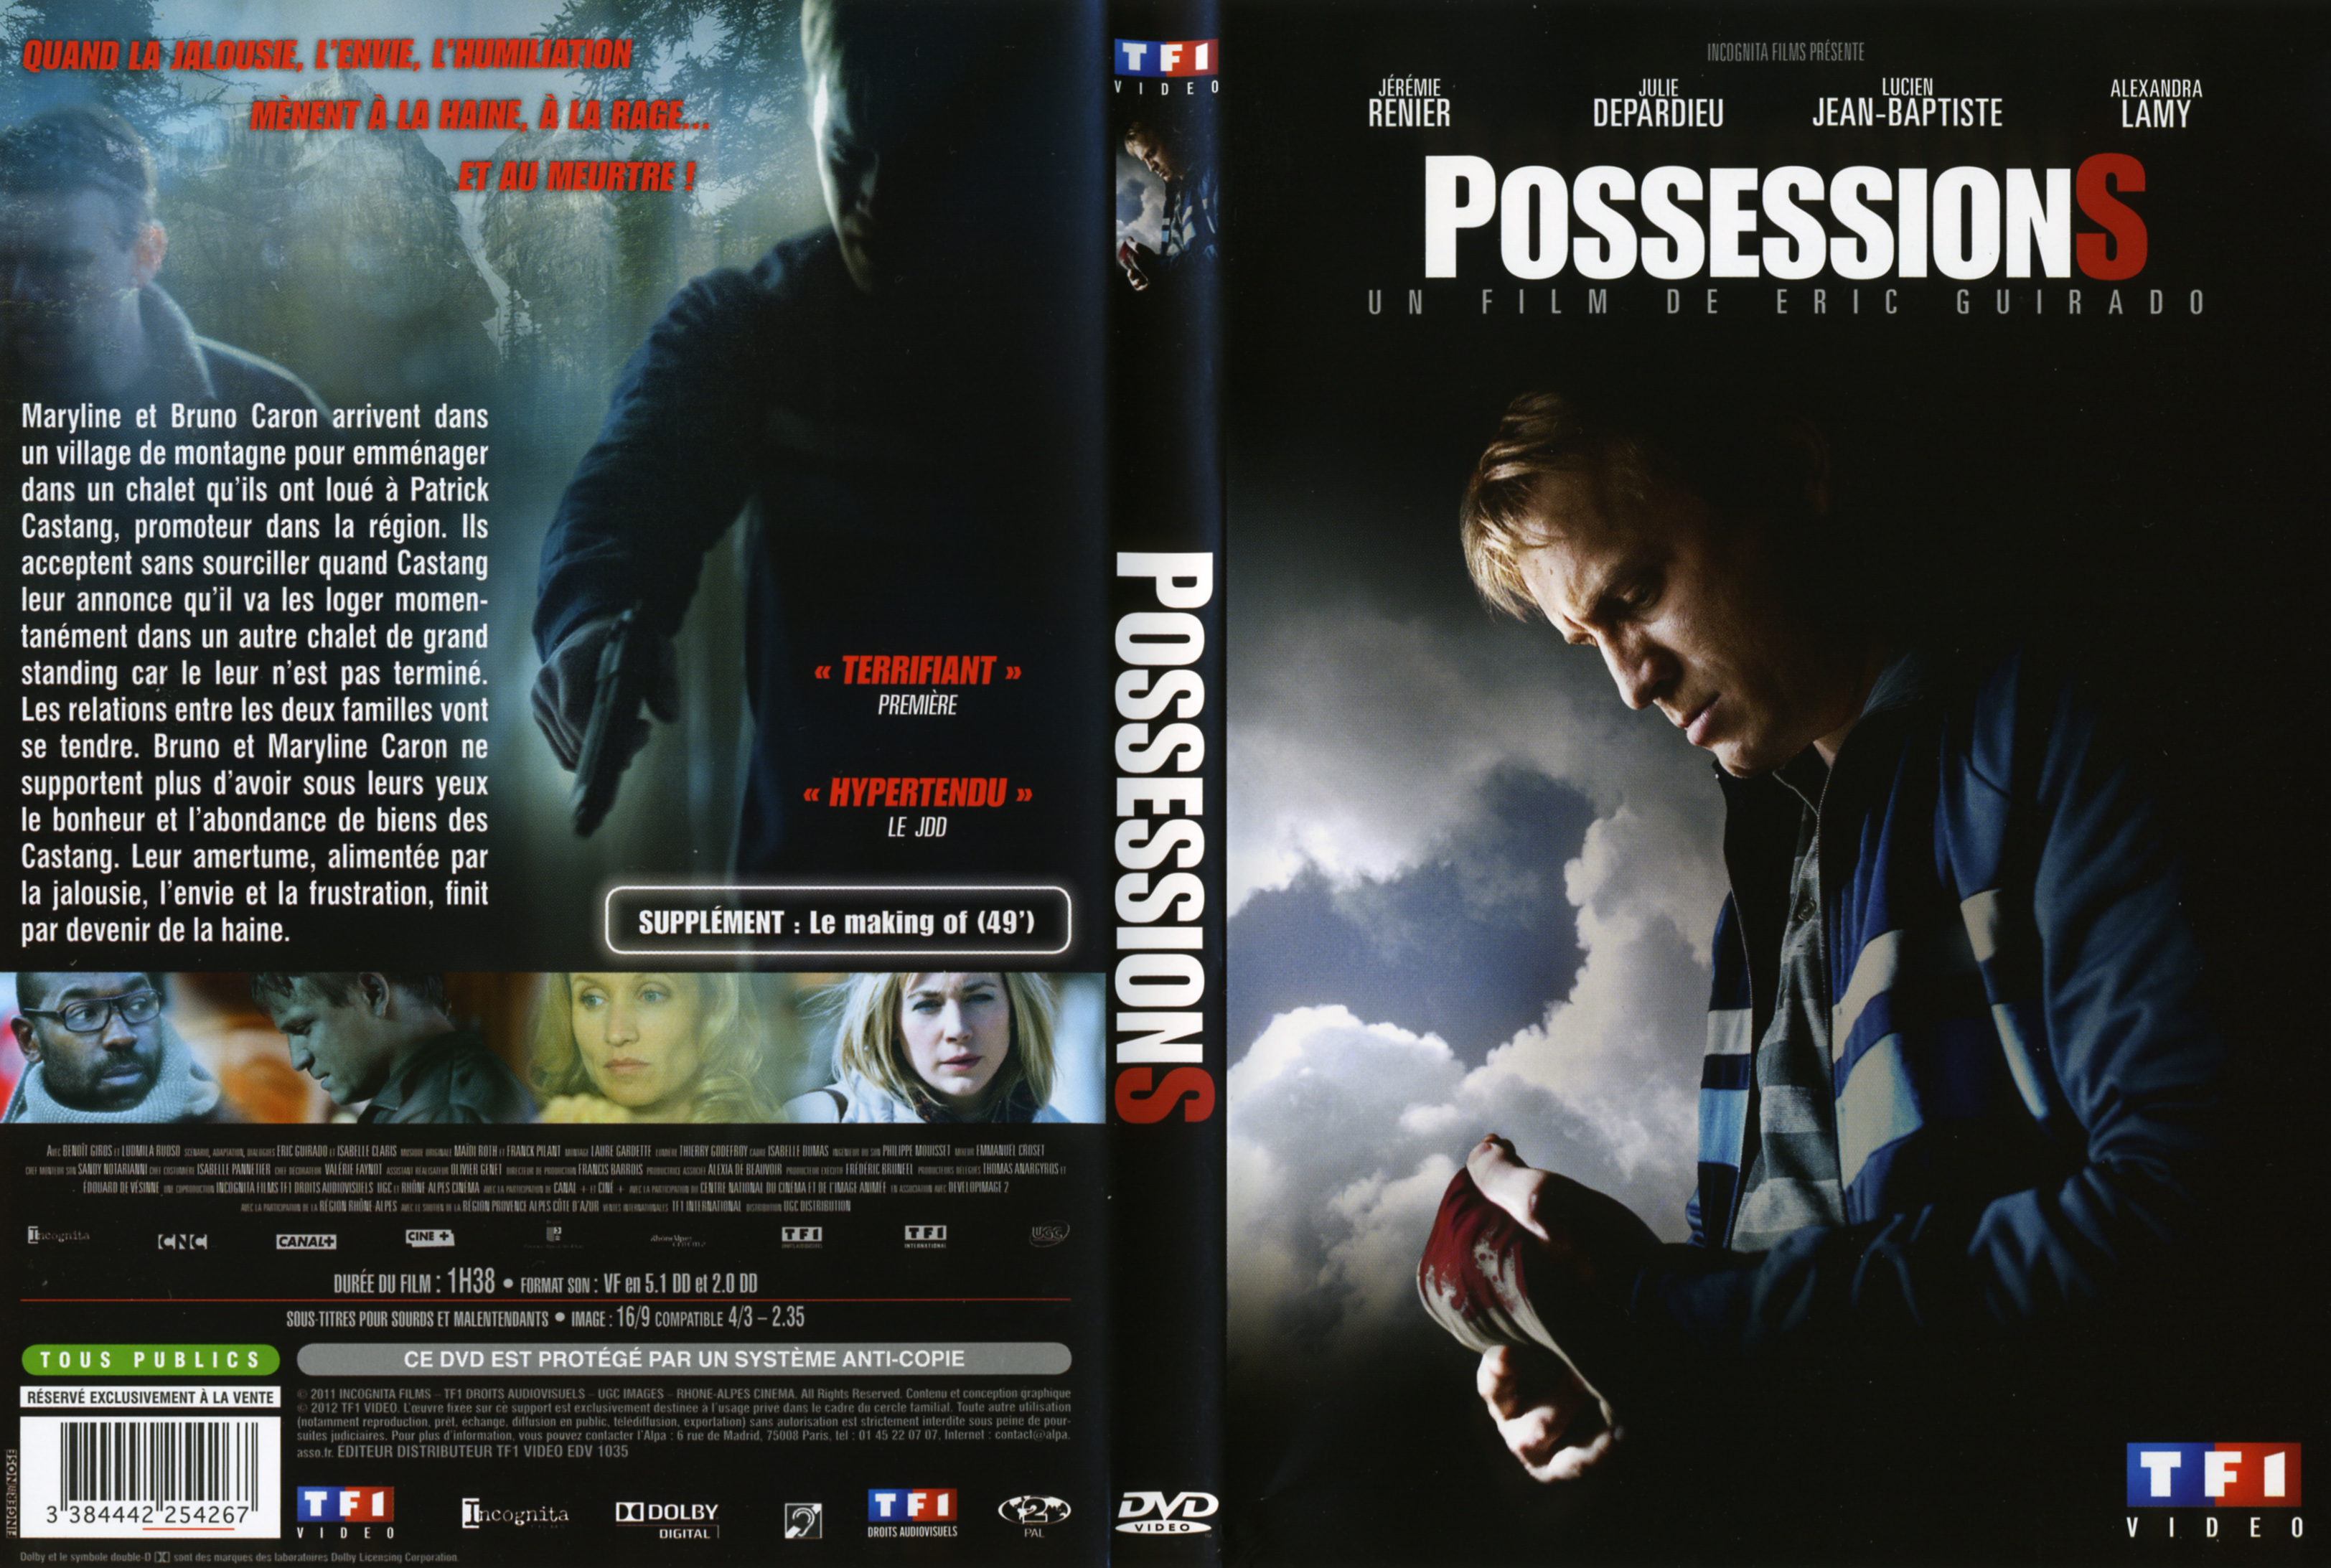 Jaquette DVD Possessions